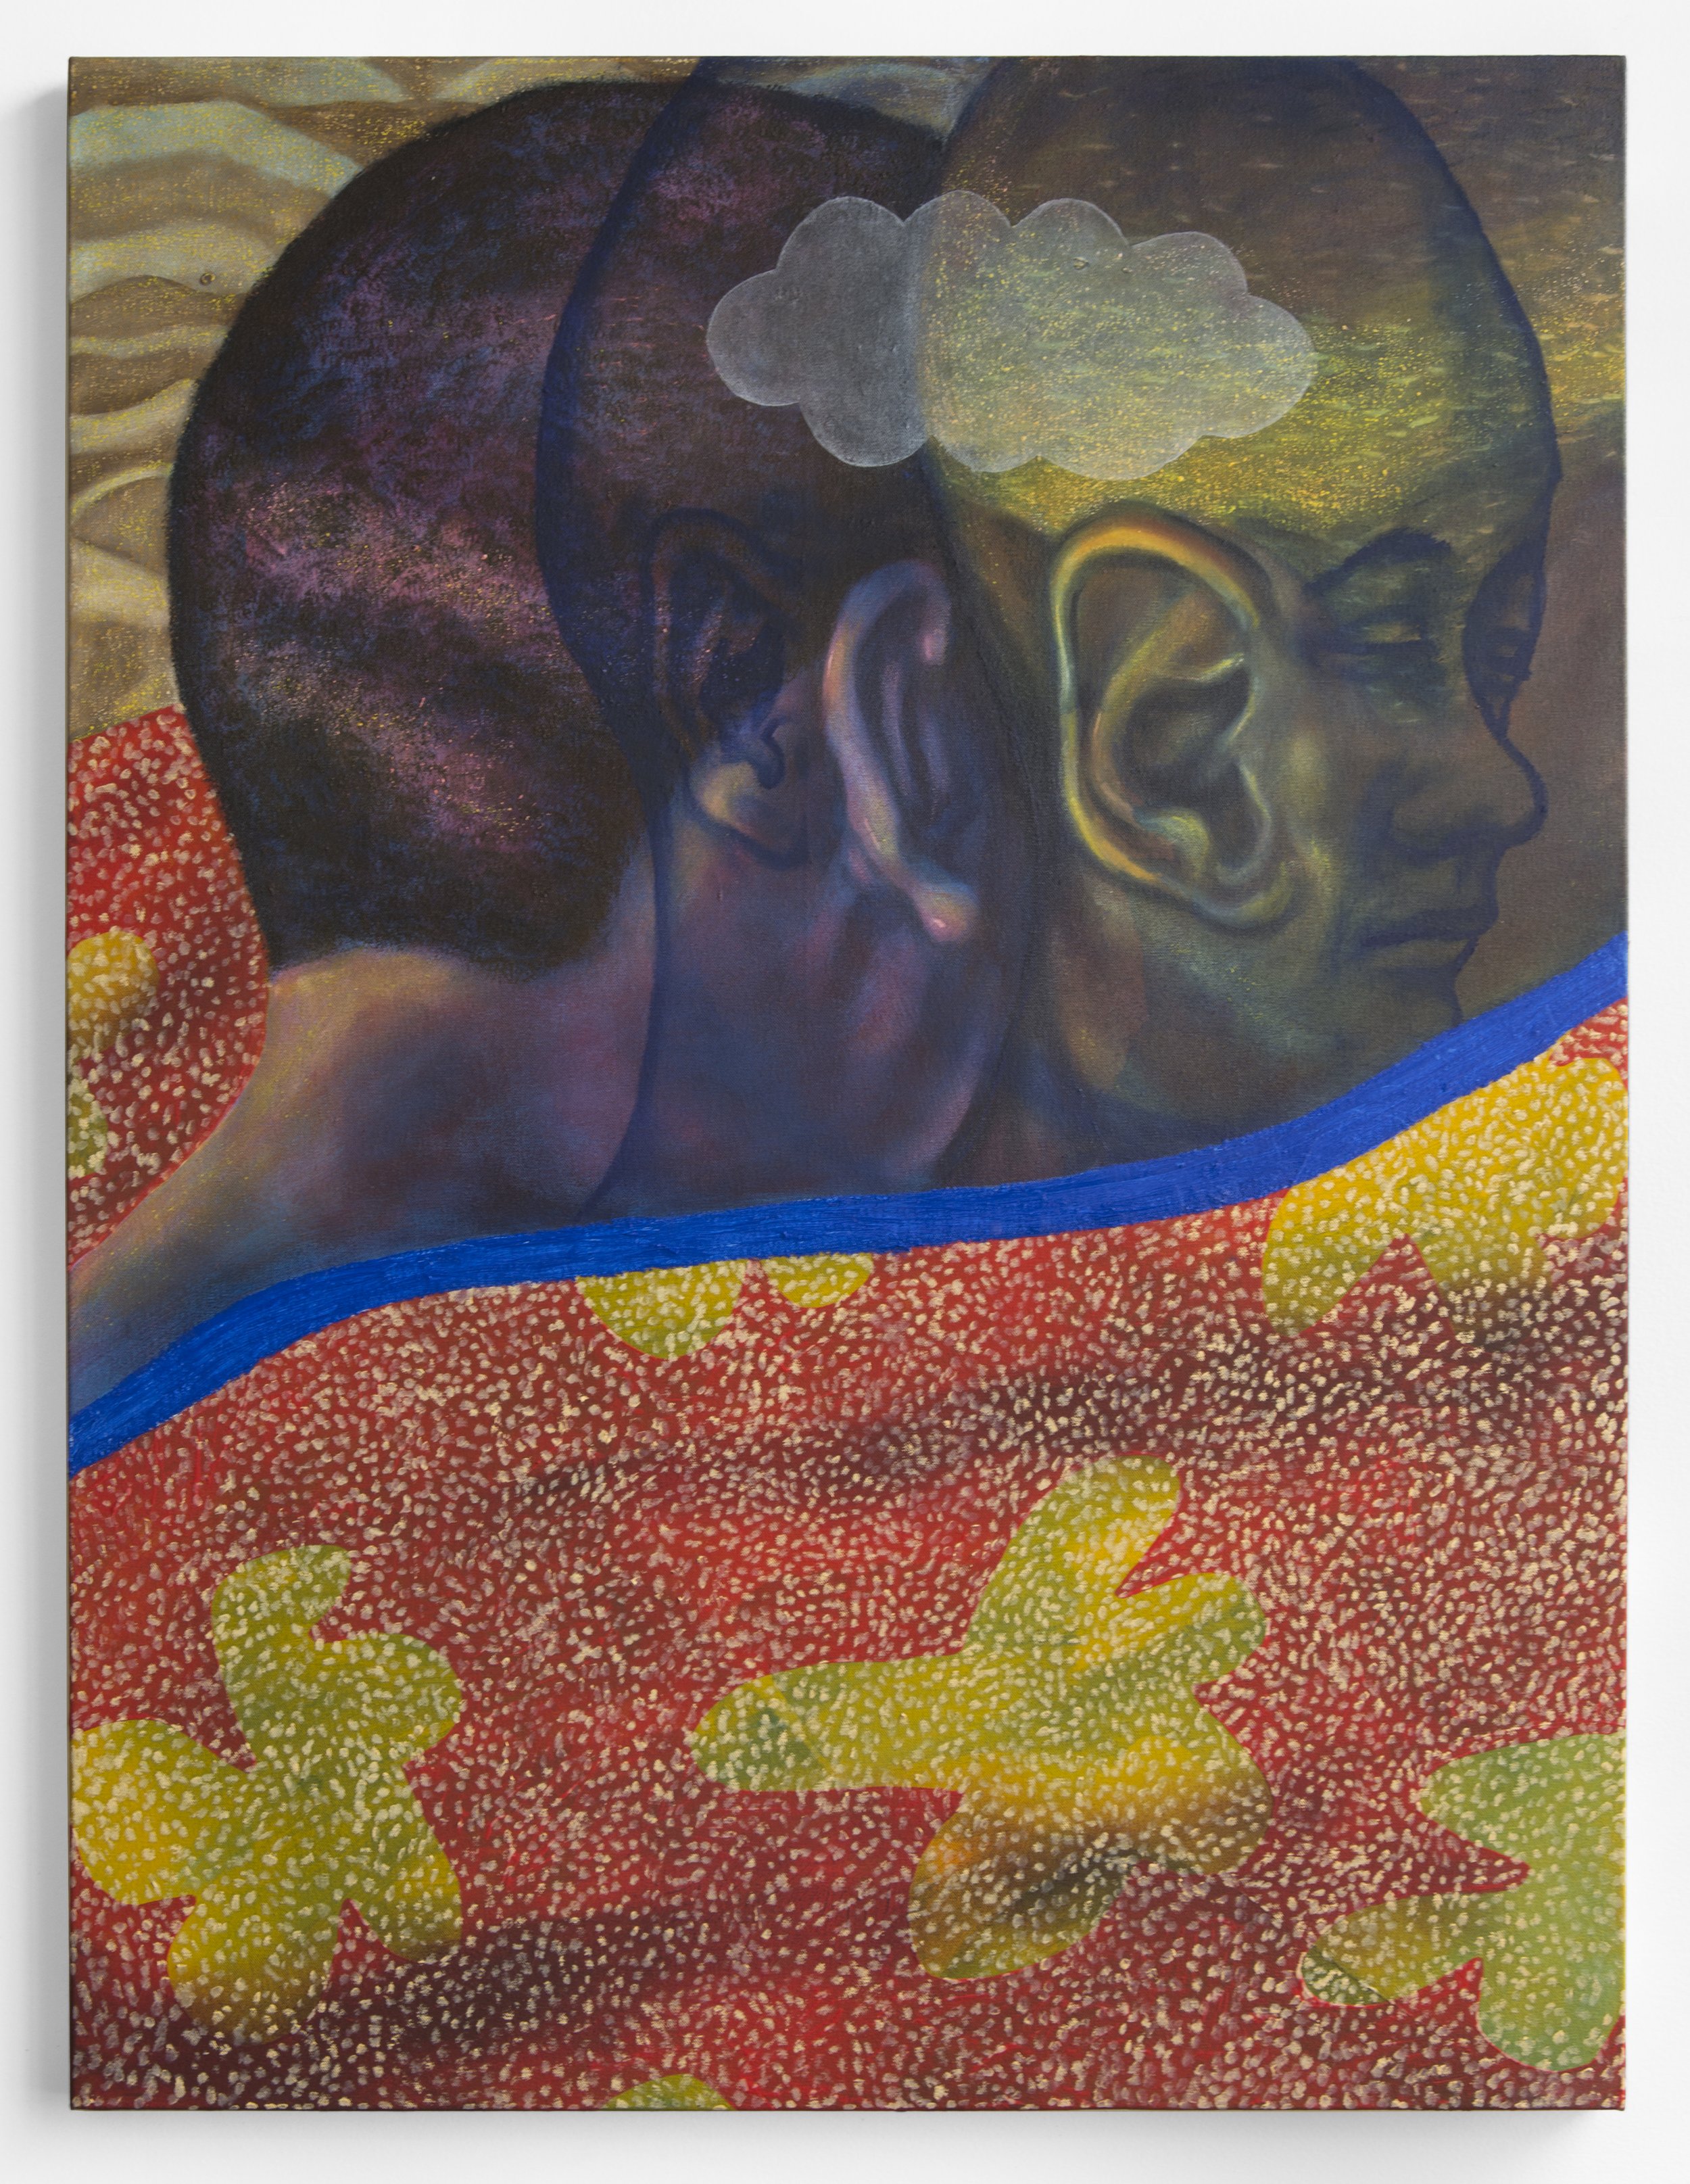   Two Minds, One Dream   acrylic, oil, and vinyl emulsion on canvas  30 x 40 in / 76 x 101.5 cm 